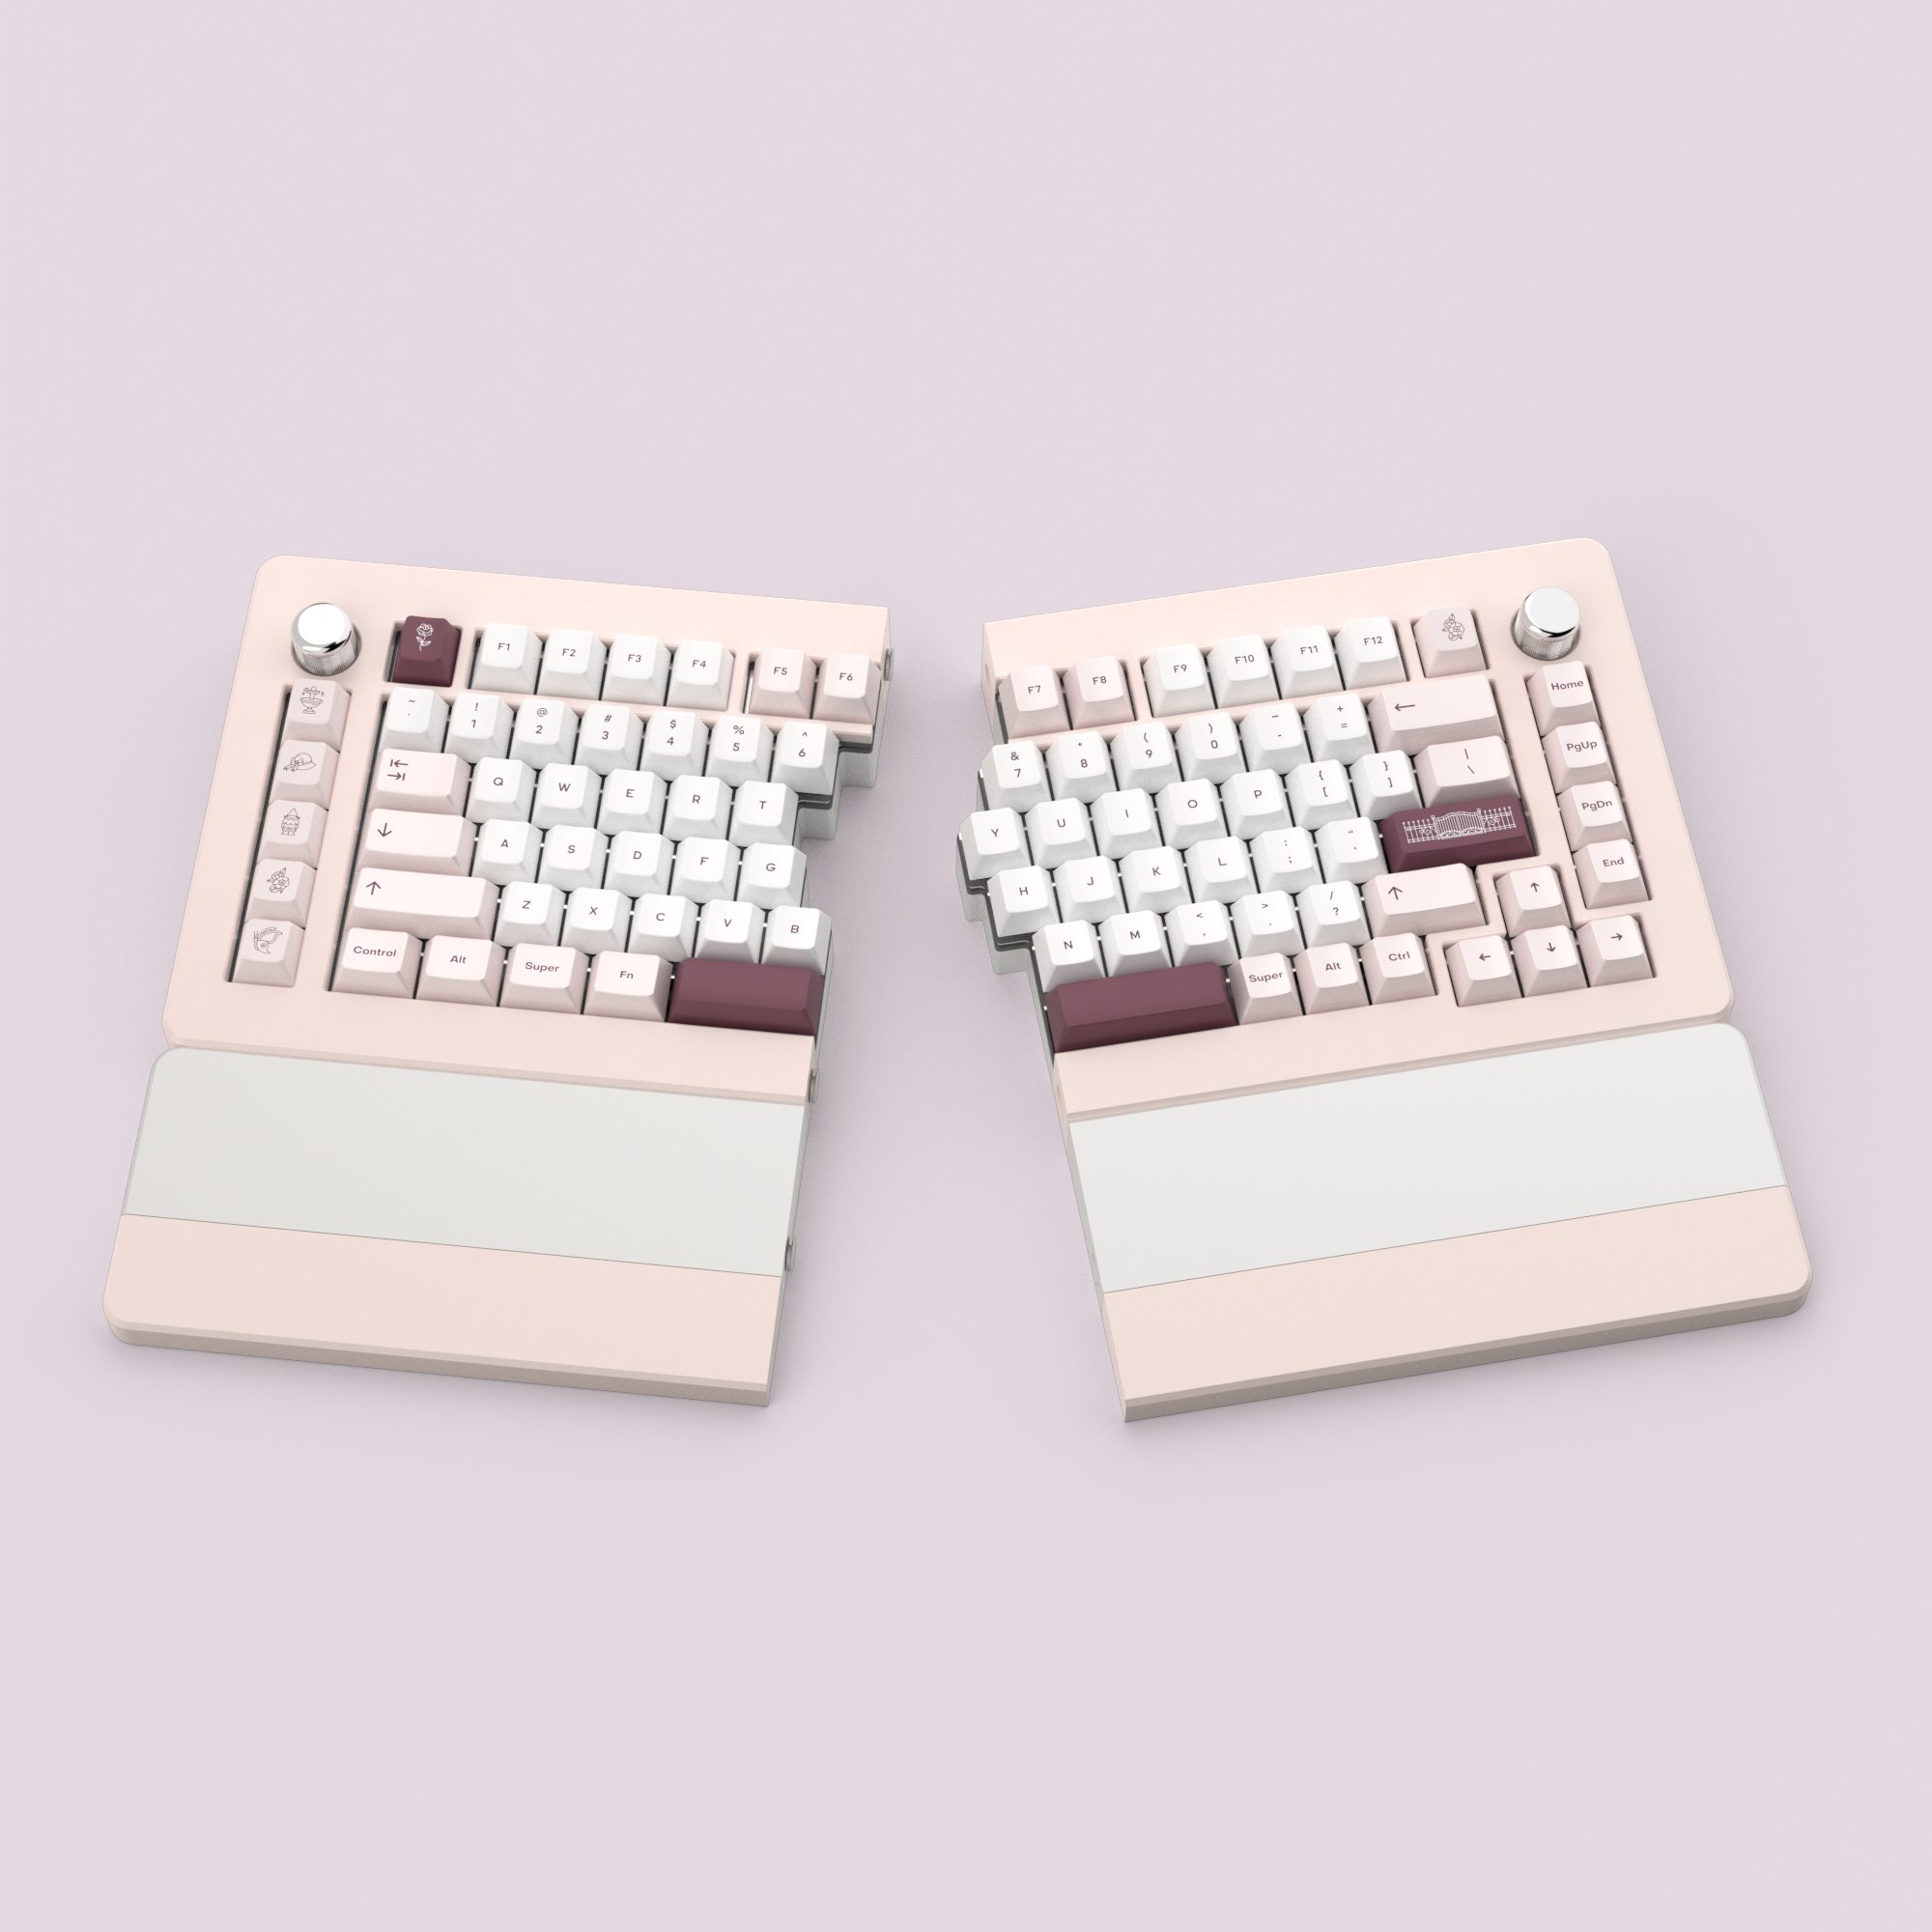 RENDER: Teacaps Rosewater keycaps on a pink Theseus75 split keyboard against a pink background.